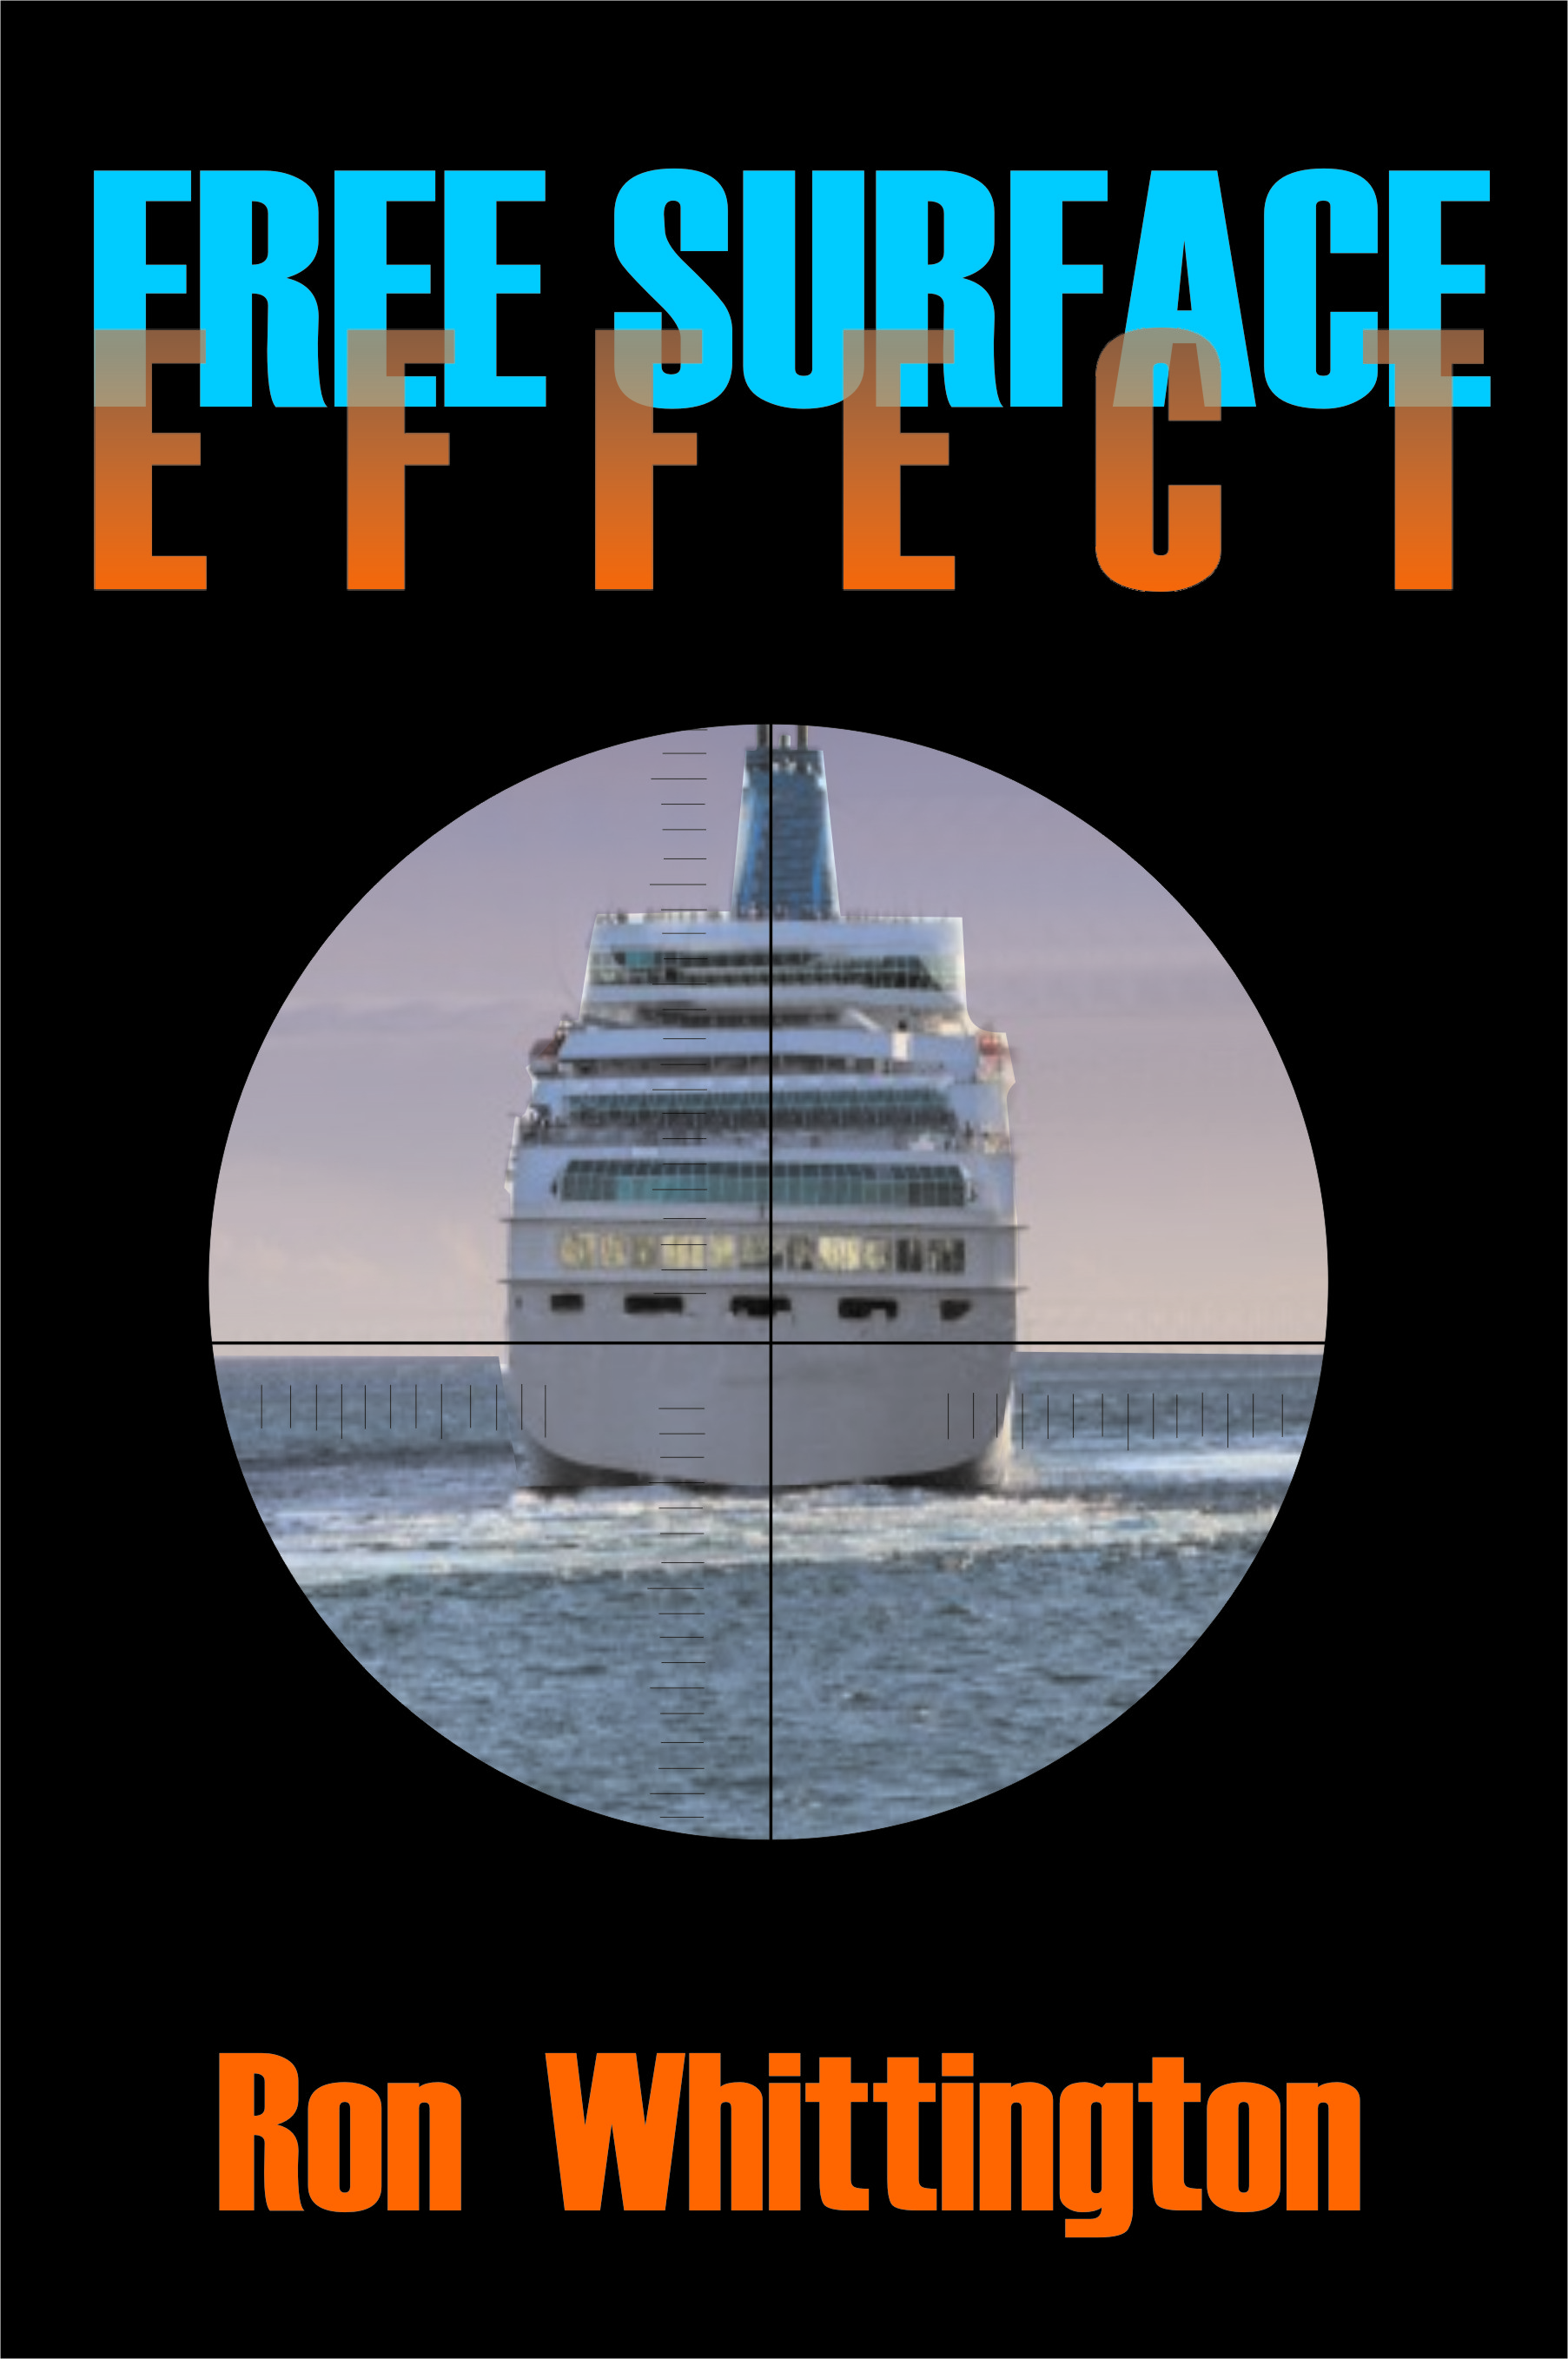 Businessman-turned-spy Parker Glynn faces off against al-Qaeda as the terror group targets cruise ships and major U.S. seaports in Free Surface Effect, the third fiction thriller by Ron Whittington.